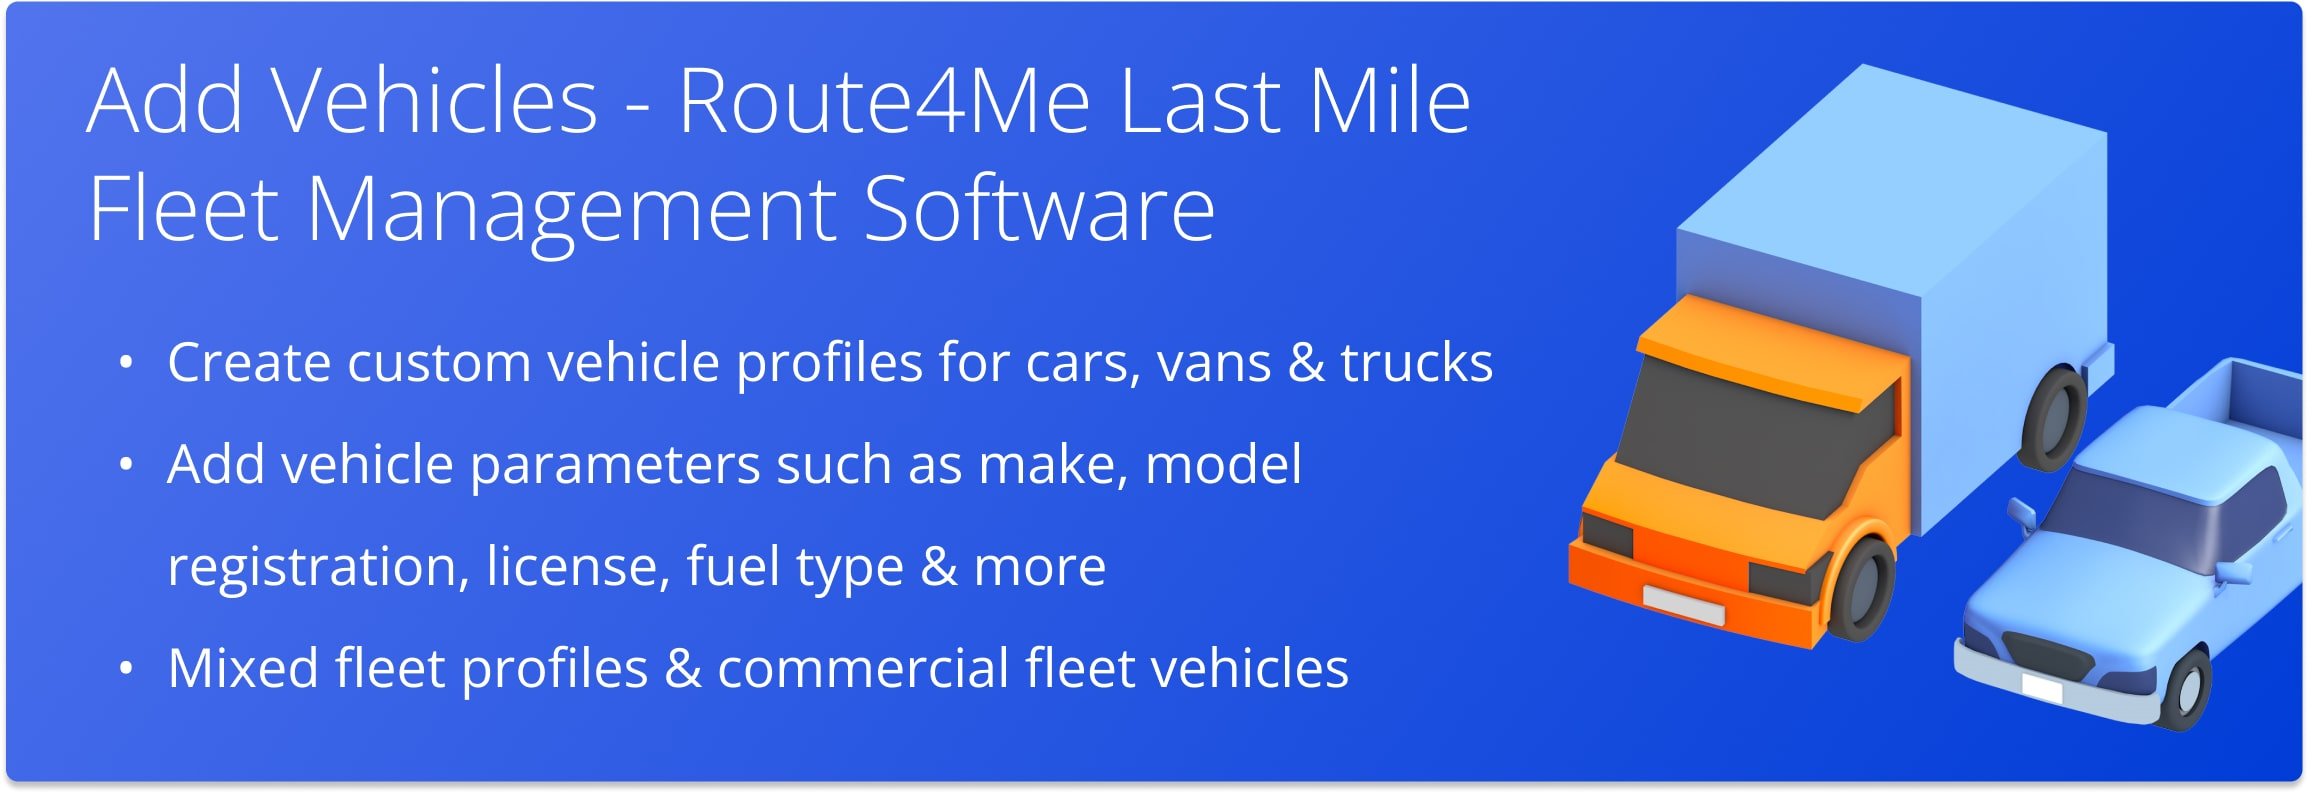 Add new vehicles to your Route4Me account, create custom vehicle profiles for cars, vans, and trucks.